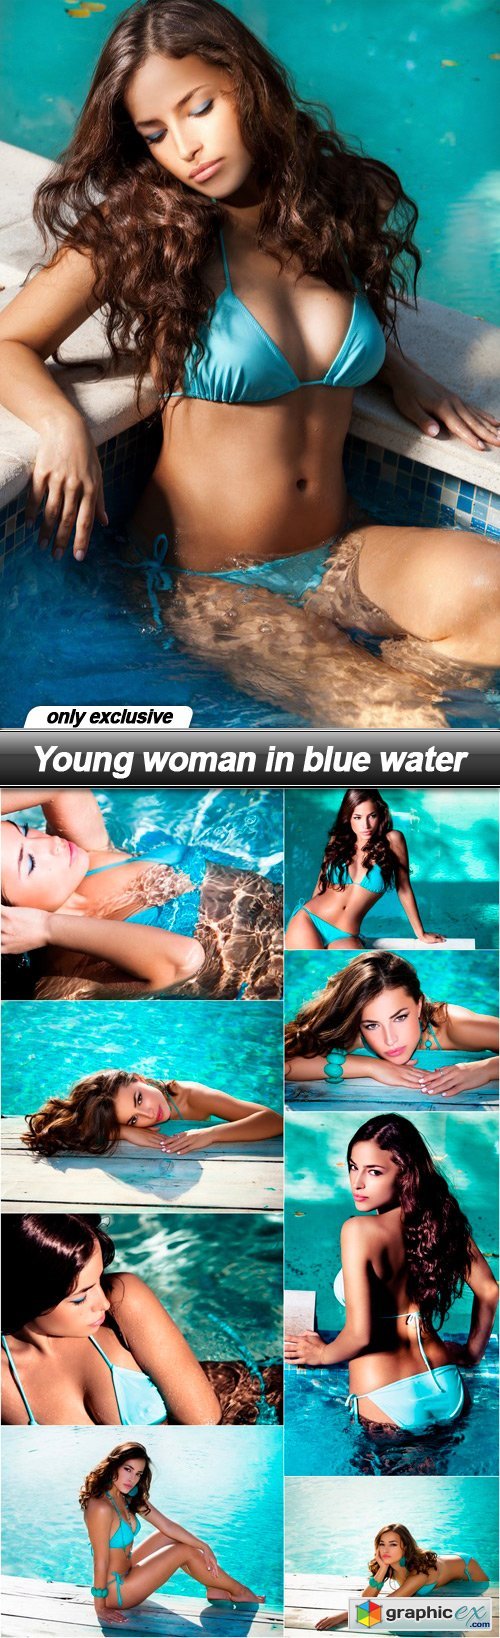 Young woman in blue water - 9 UHQ JPEG